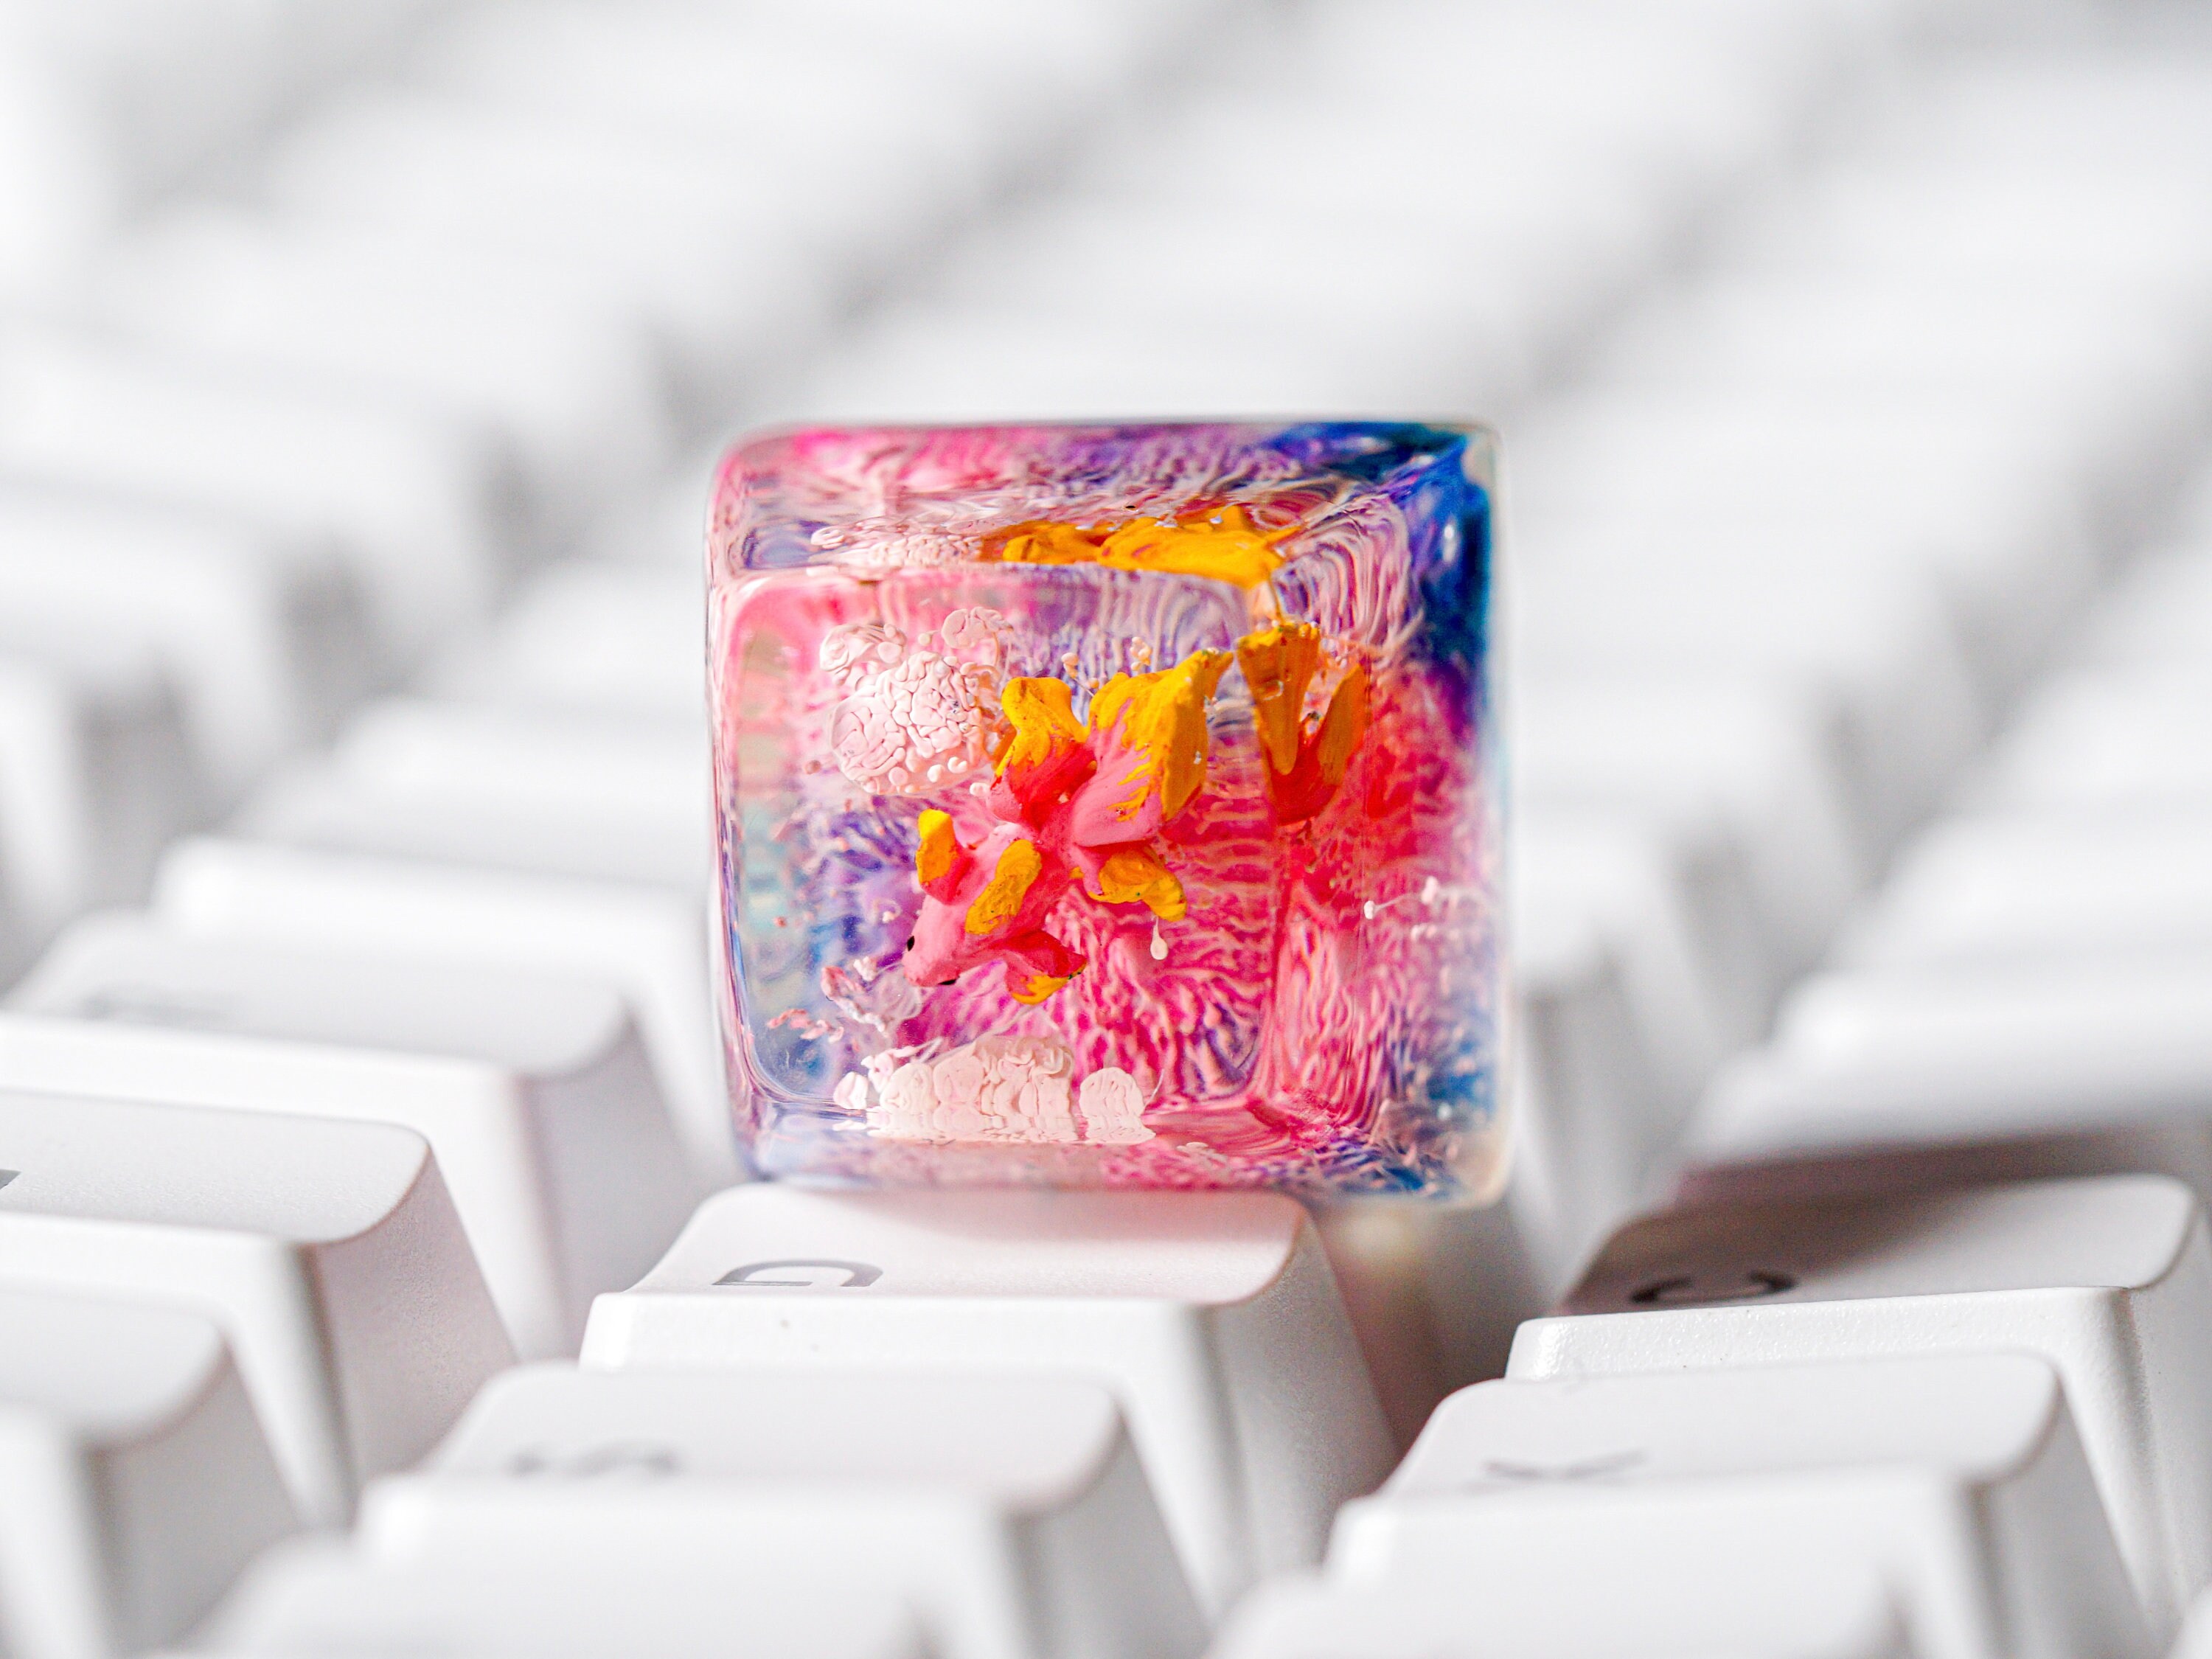 Pink Yellow Fish Keycap, Artisan Keycap, Esc Keycap, Keycap for MX Cherry Switches Keyboard, Gift for Him